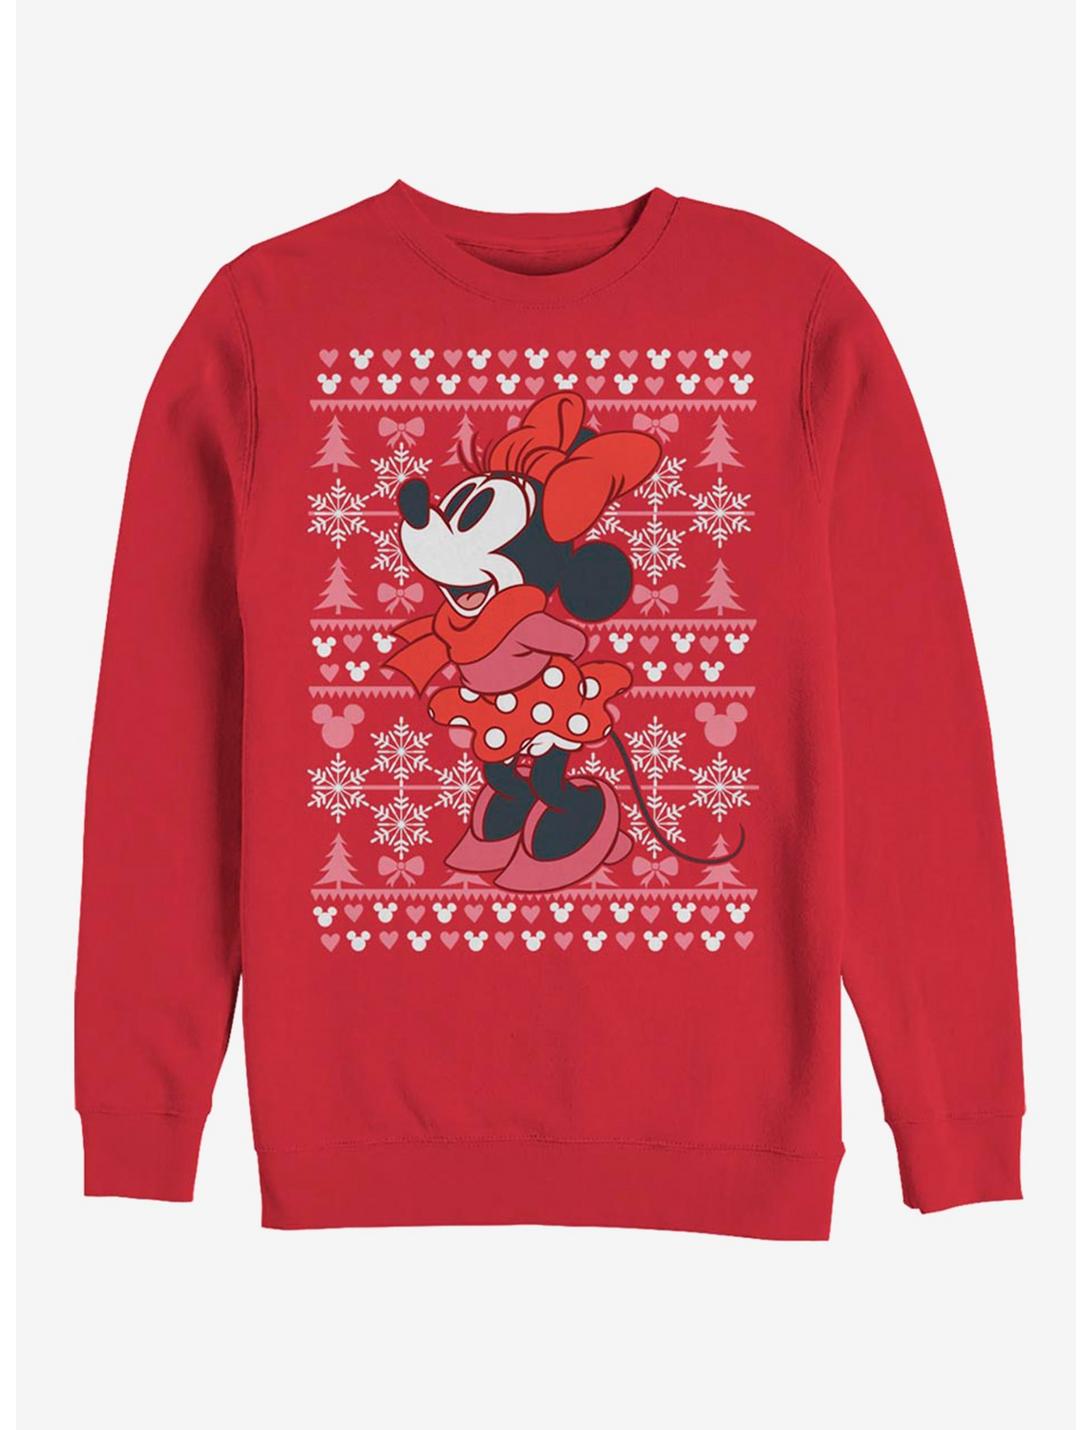 Disney Minnie Mouse Holiday Winter Sweater Crew Sweatshirt, RED, hi-res